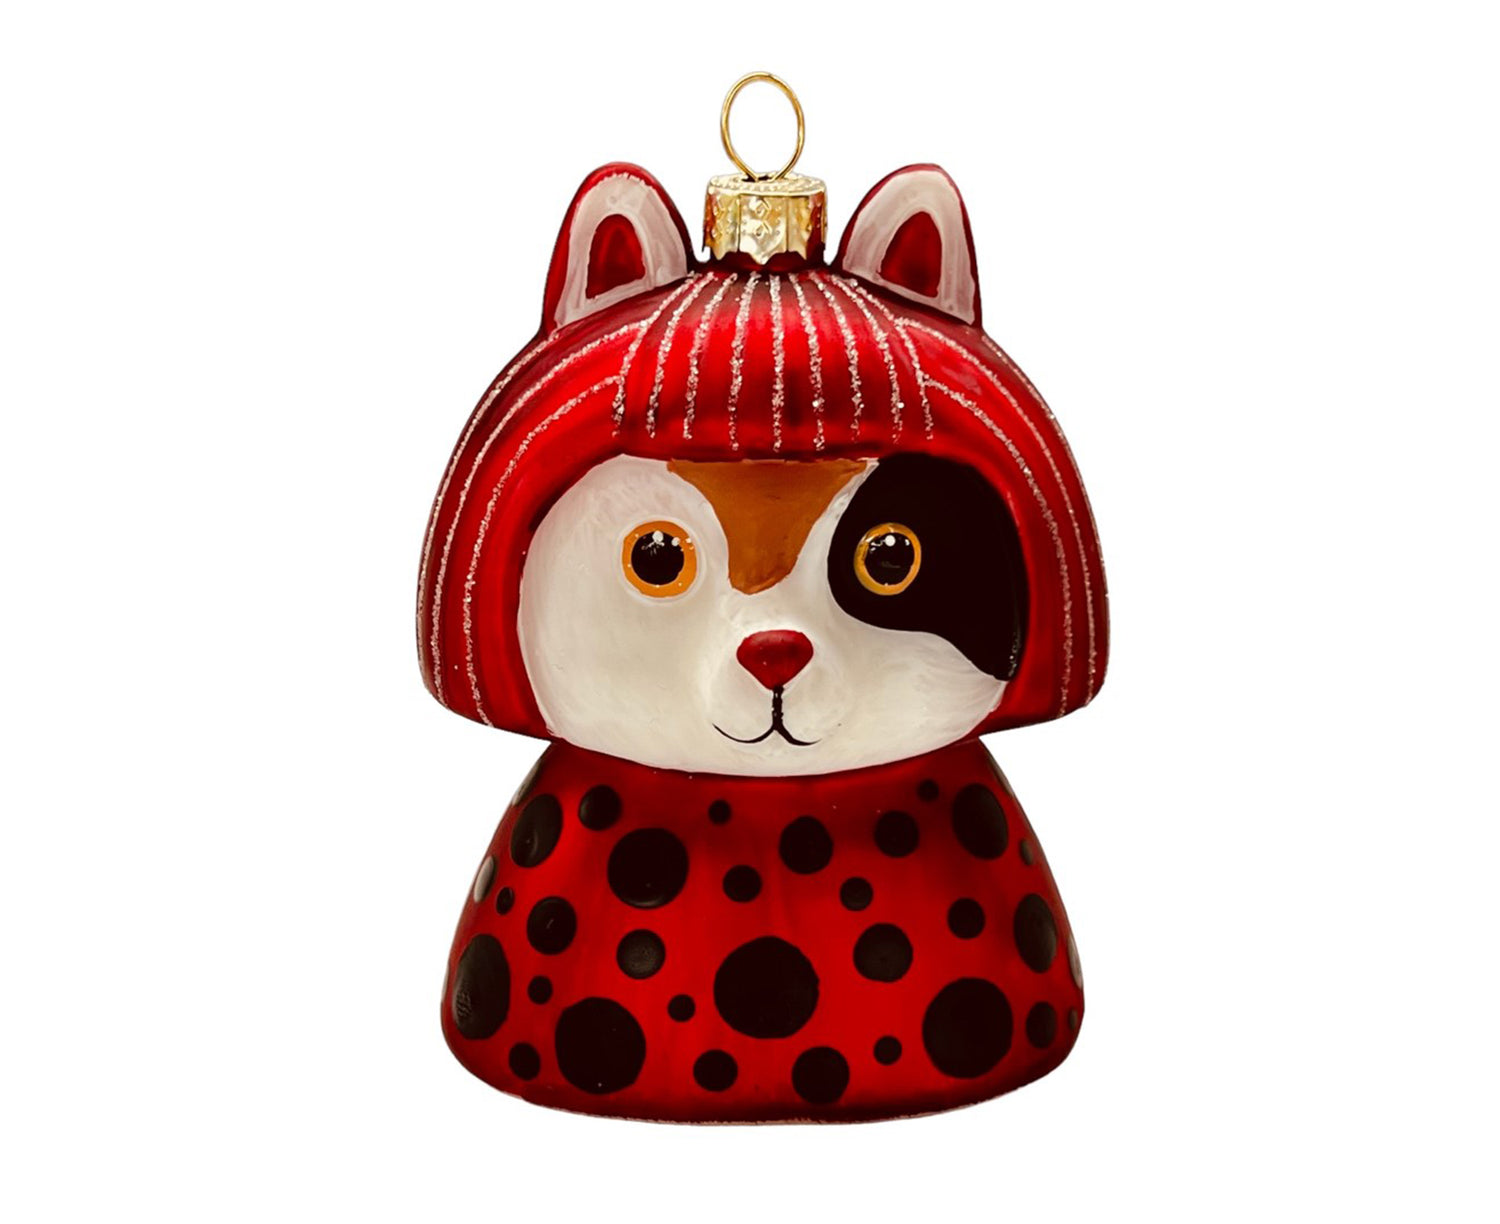 Kusameow Glass Ornament by Naked Decor